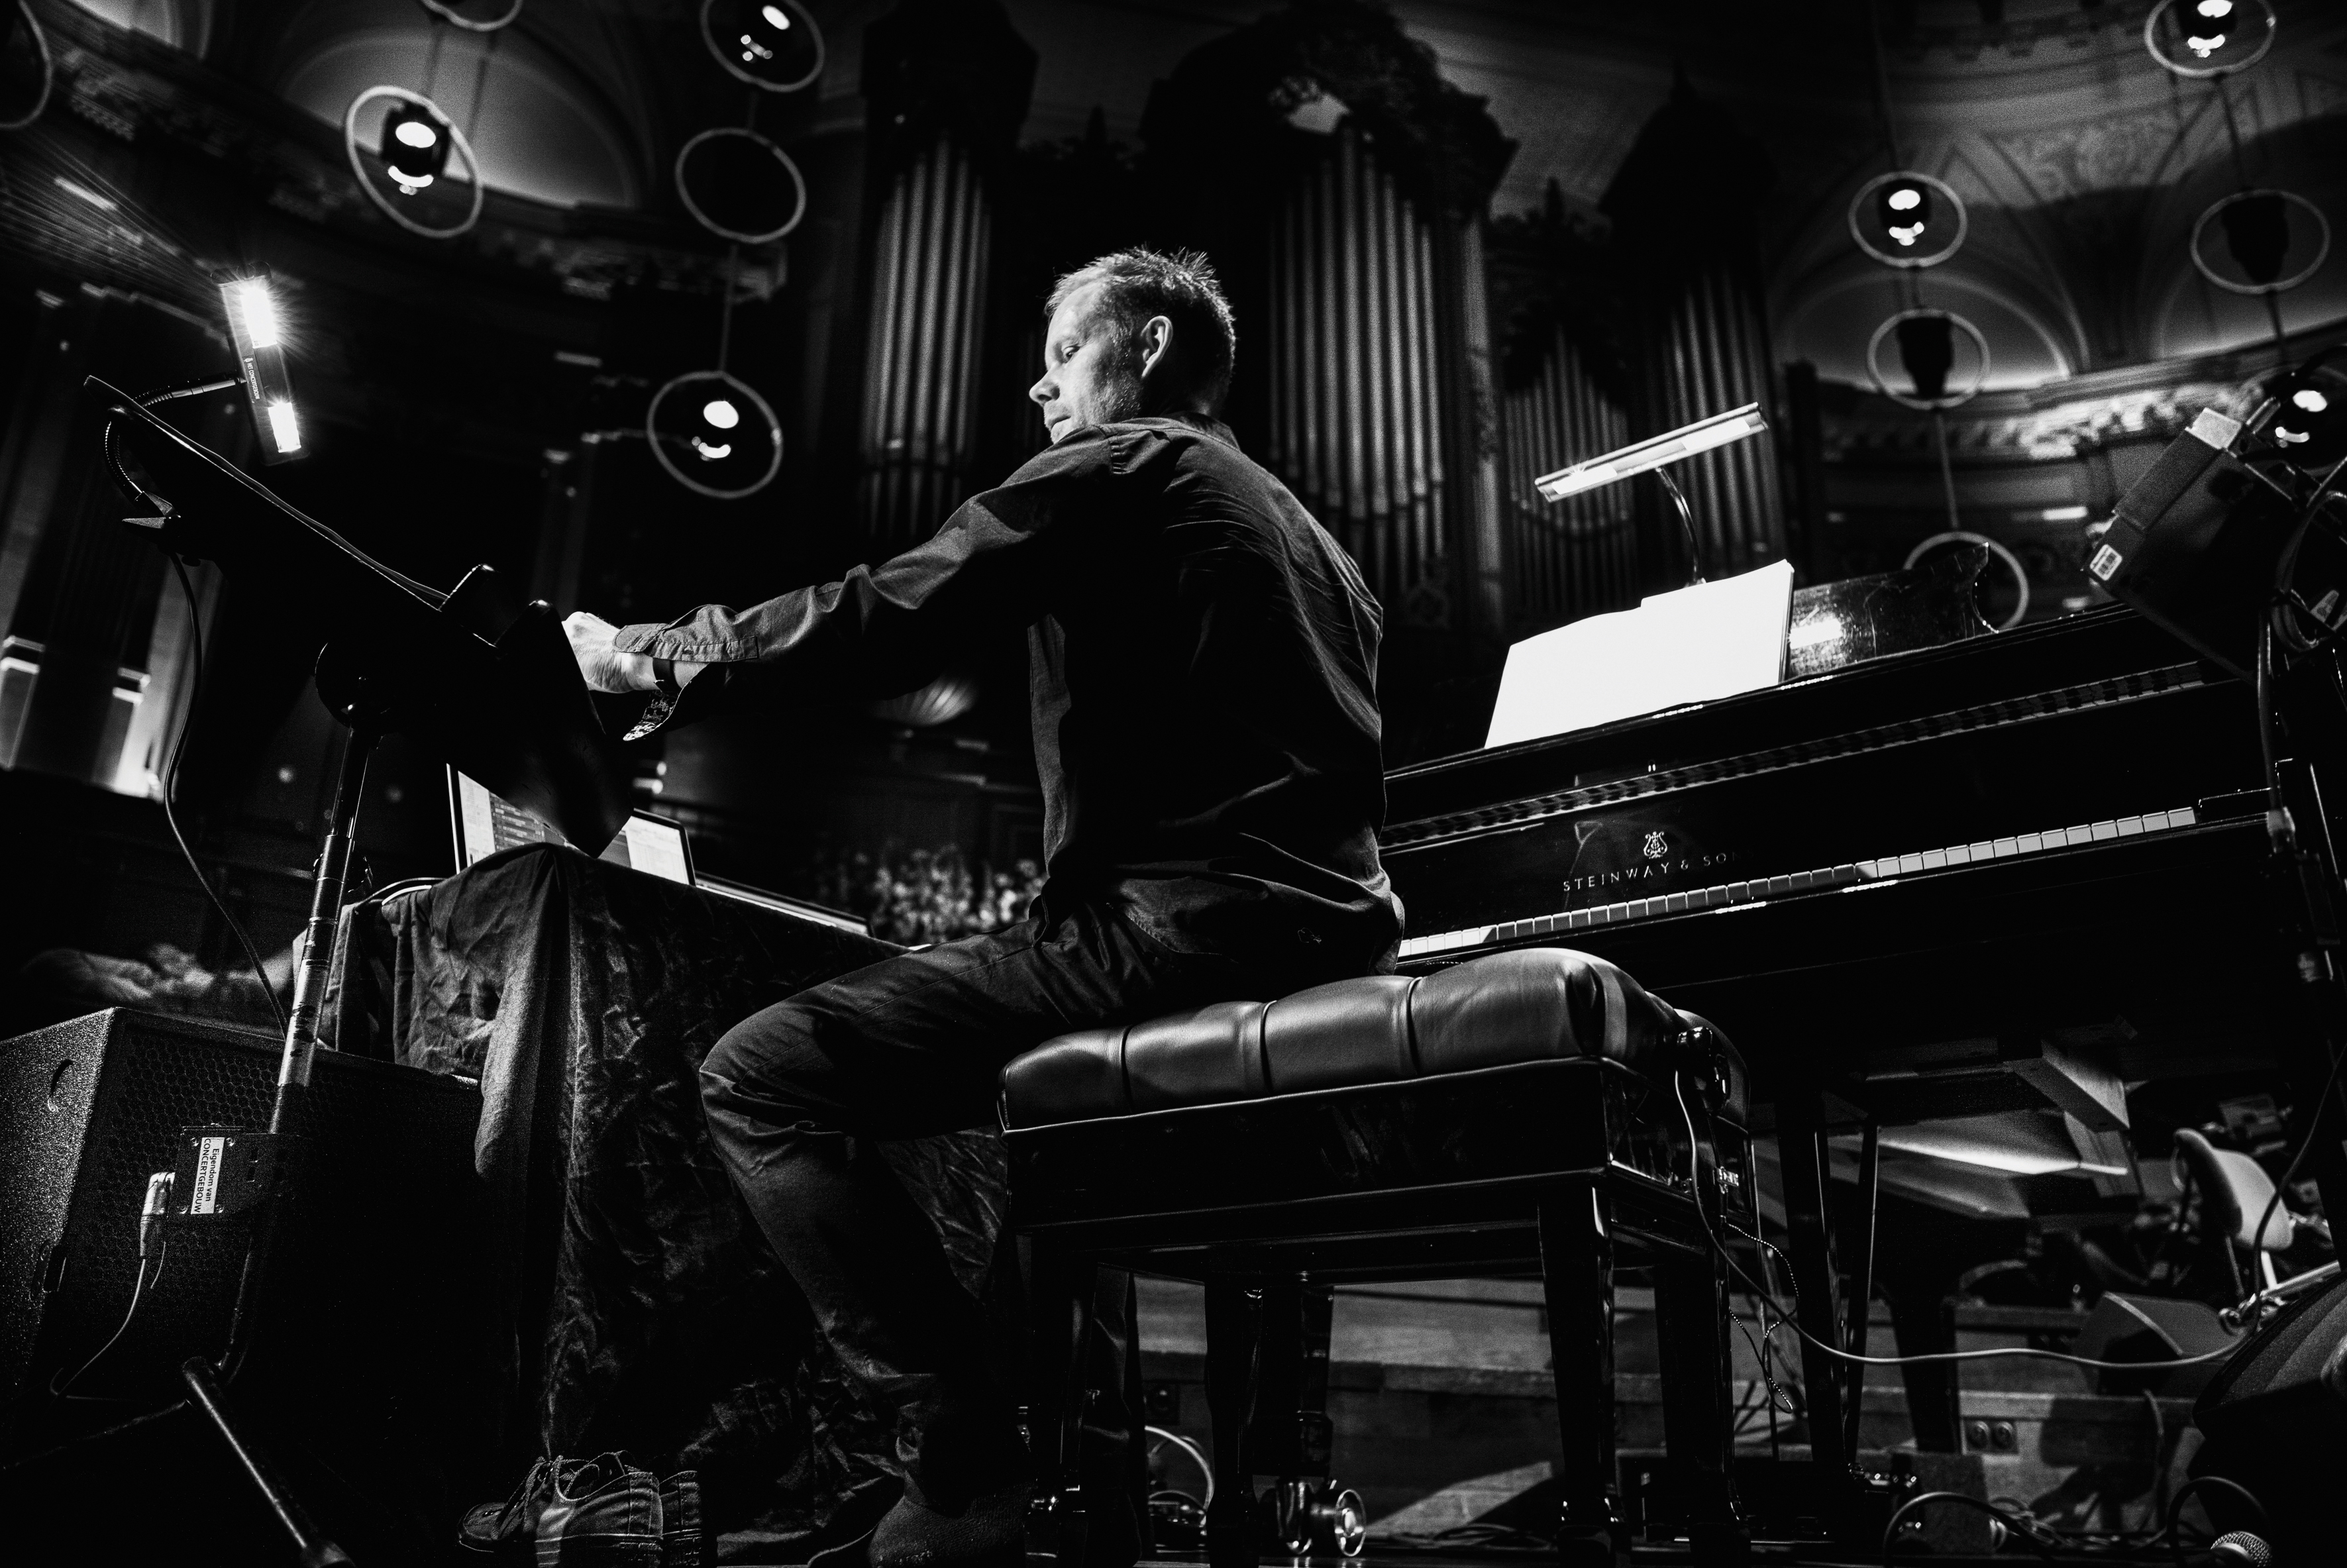 Electro-acoustic musician Max Richter coming to UGA